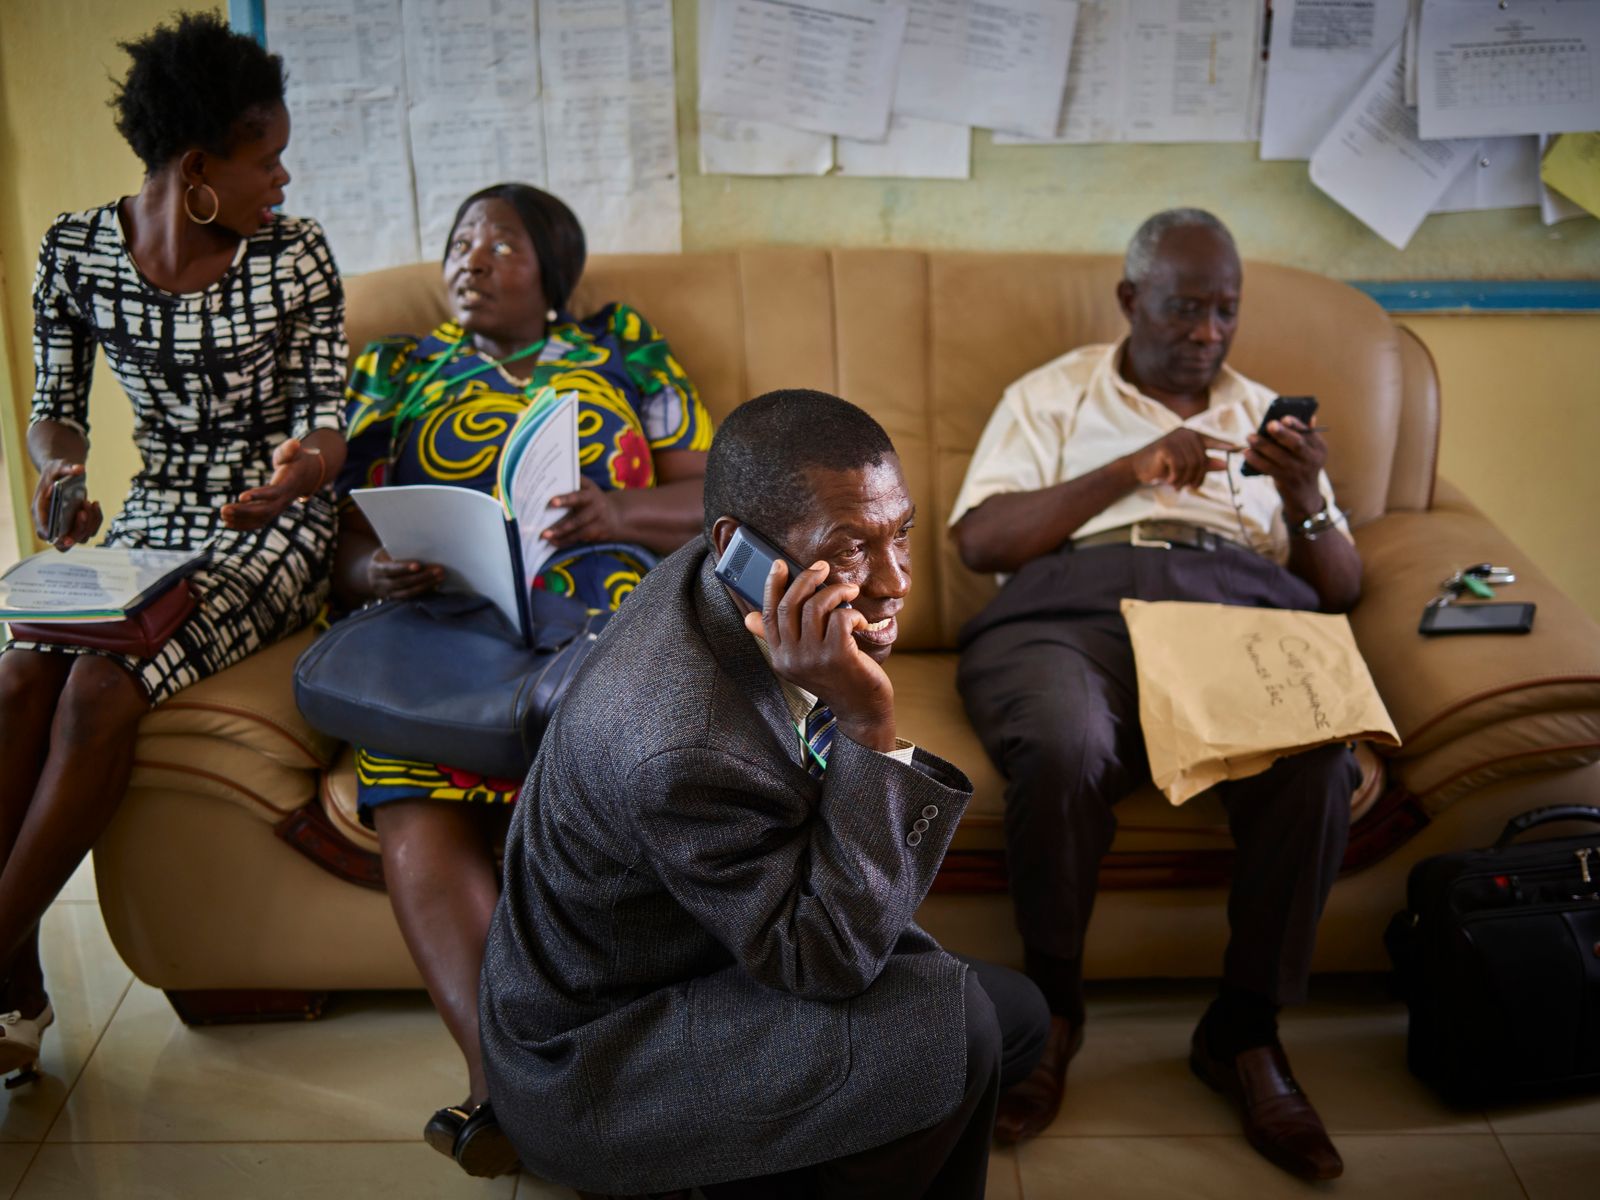 © Jörg Gläscher - Members of Petauke Town council preparing for the monthly city meeting in city hall of Petauke, Zambia